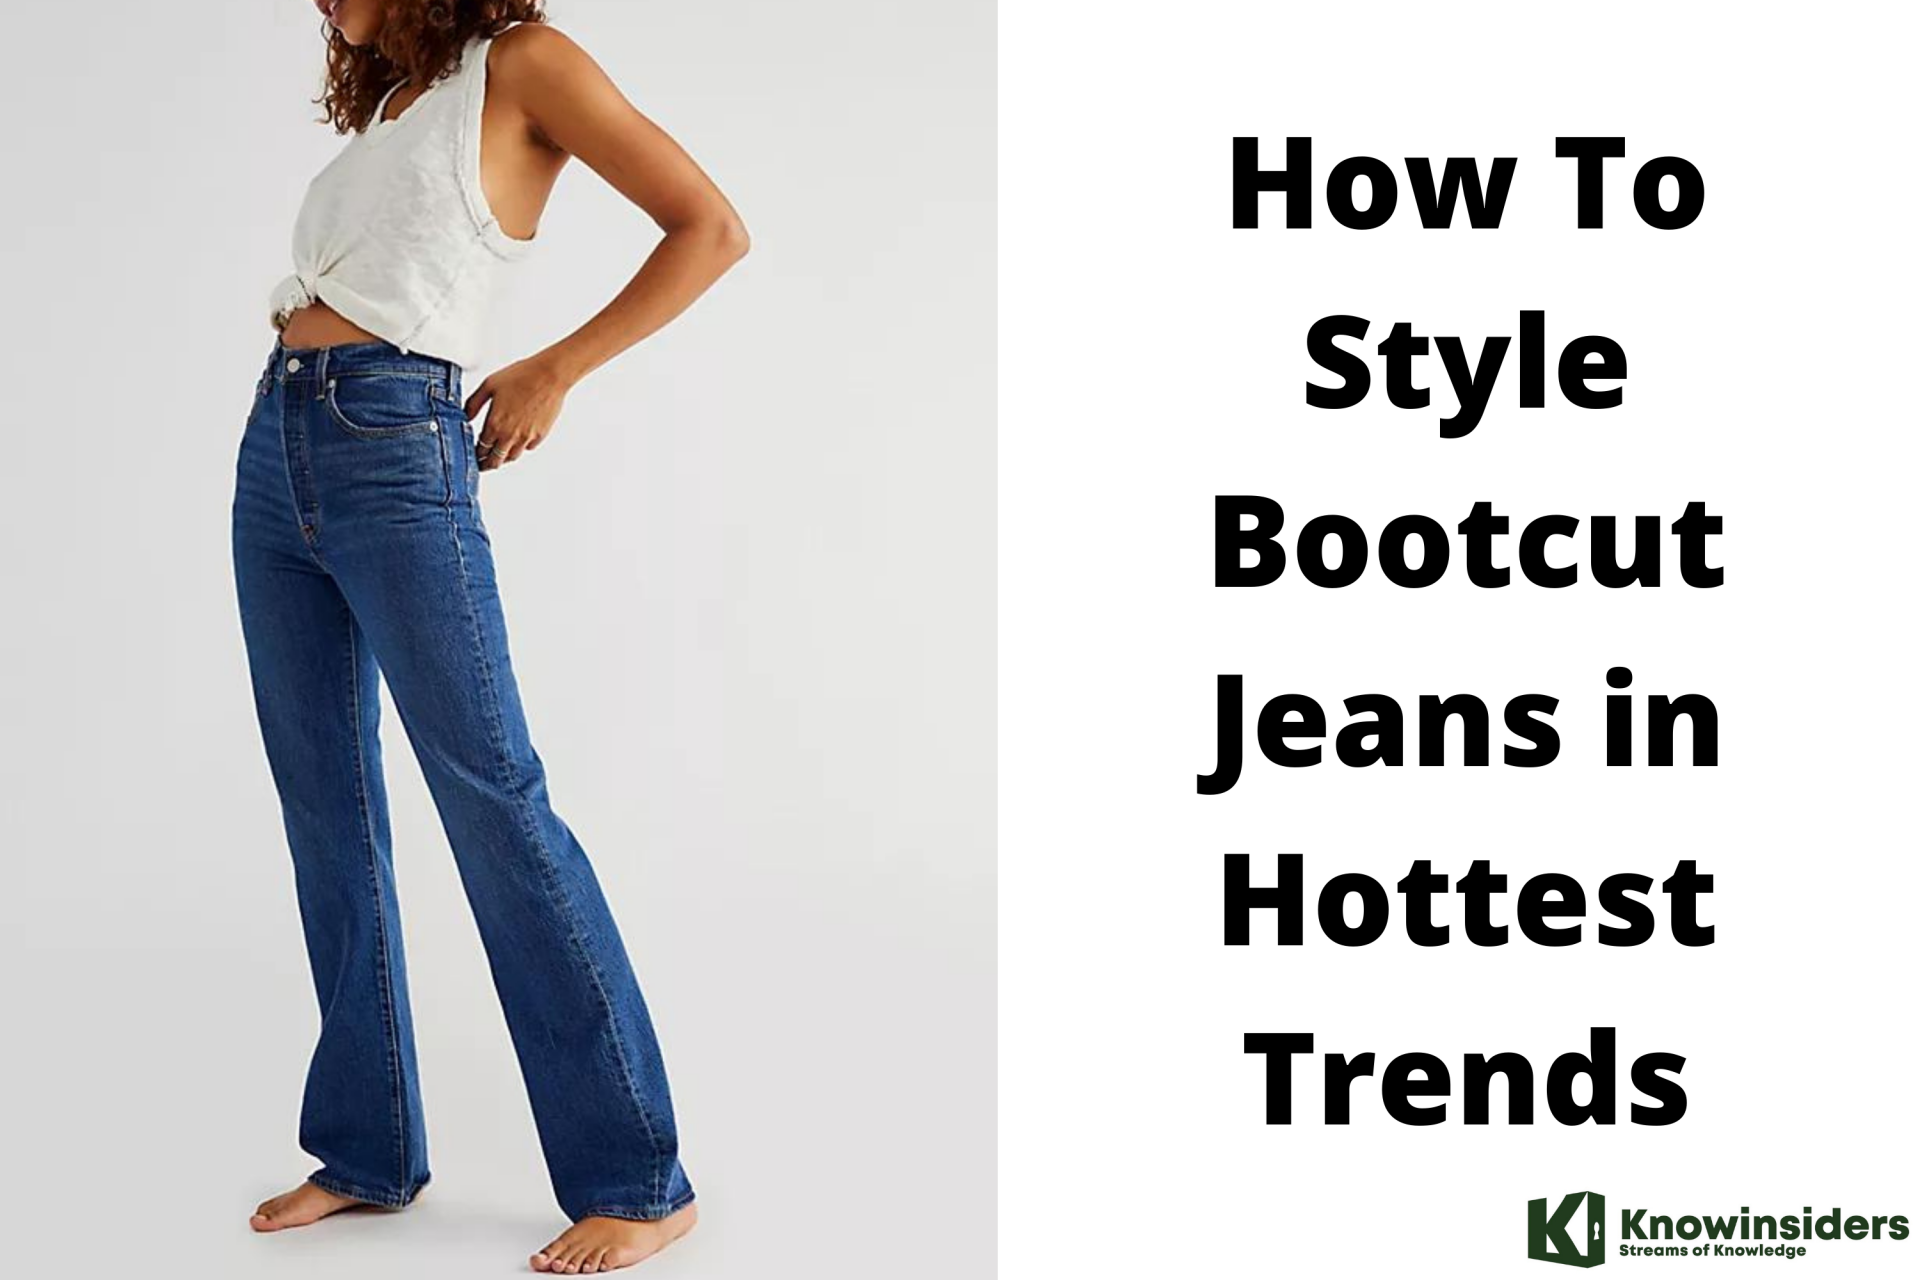 How To Style Women Bootcut Jeans in Hottest Trends